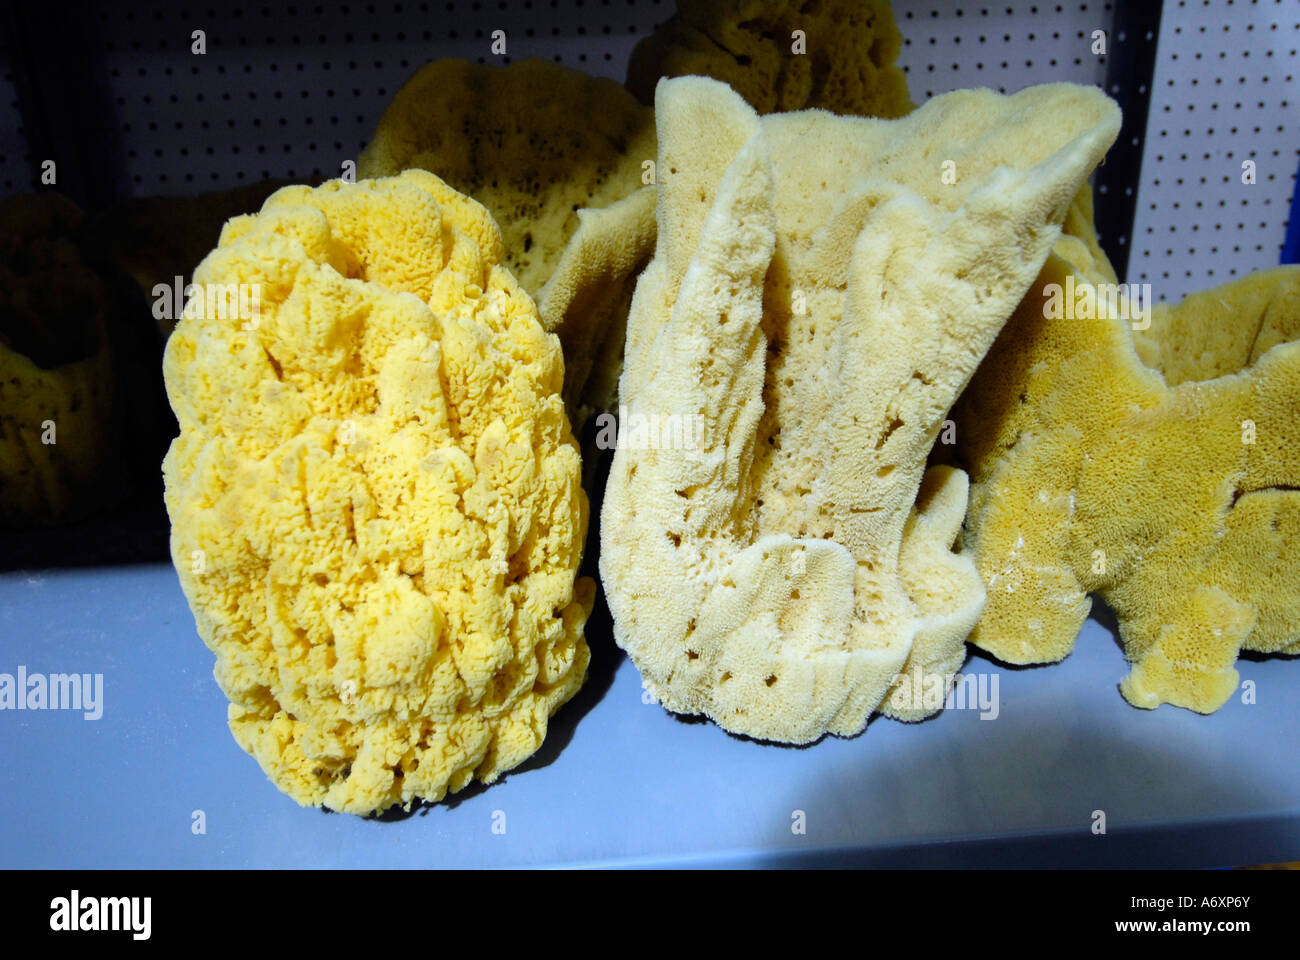 Sponge on display at the Worlds largest Shell Factory a popular tourist attraction in North Fort FT Myers Florida FL Stock Photo